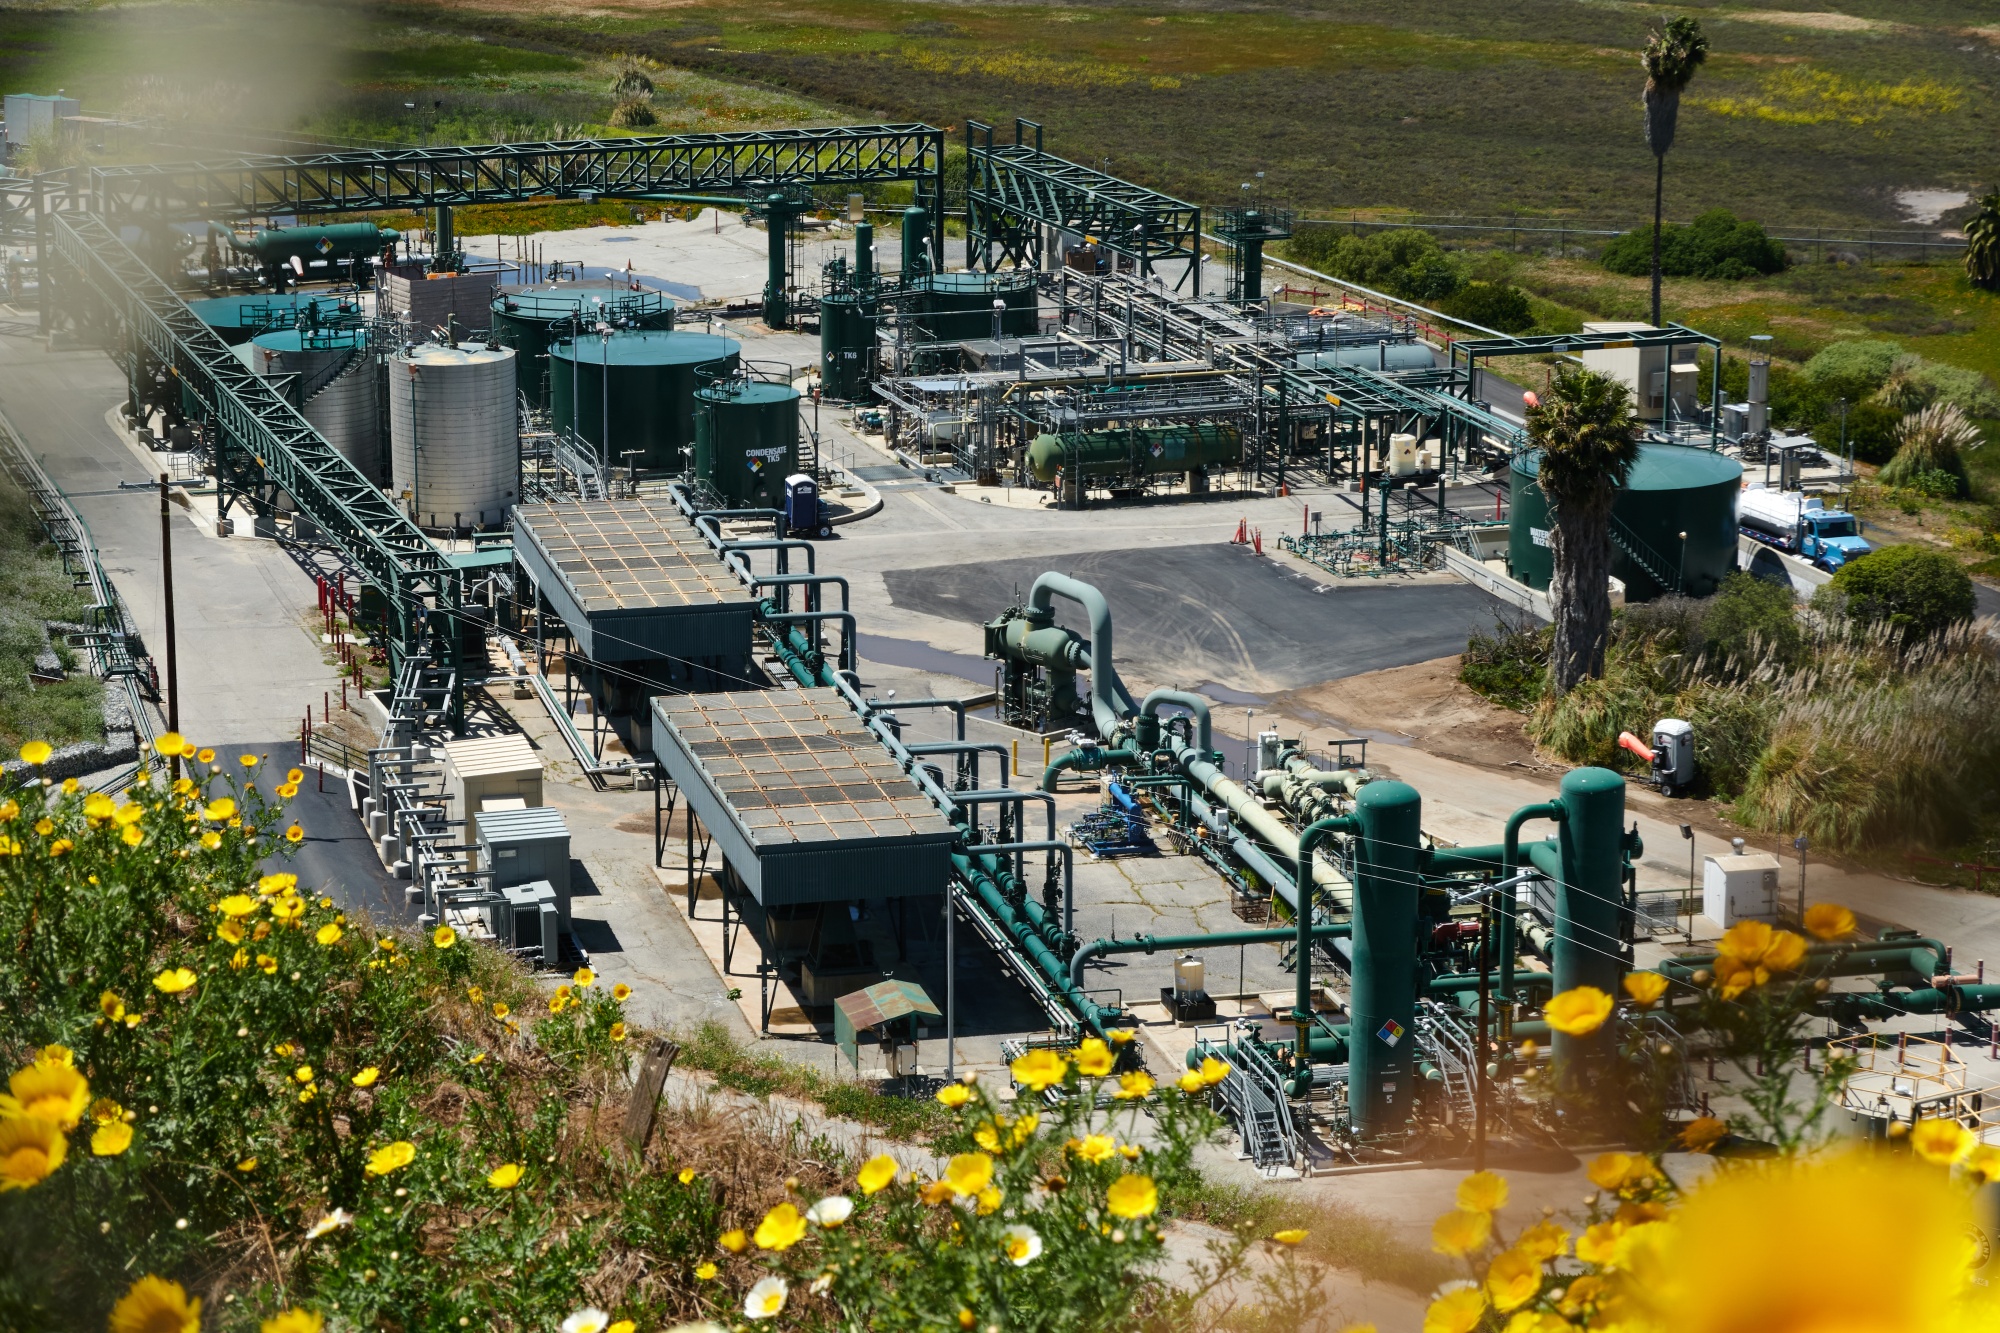 The Southern California Gas Co. Playa del Rey underground natural gas storage facility in the Playa del Rey neighborhood of Los Angeles.